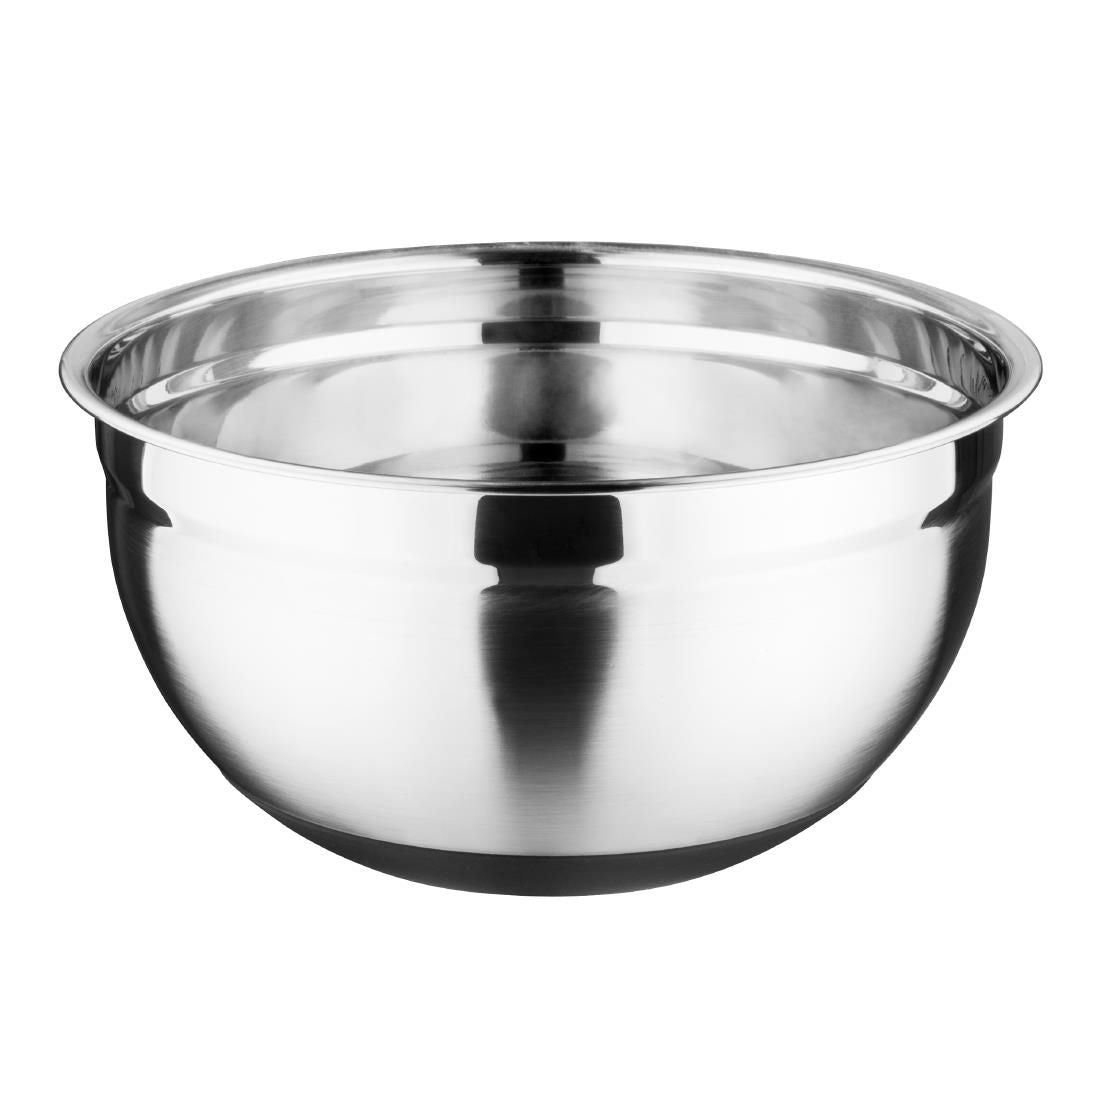 GG023 Vogue Stainless Steel Bowl with Silicone Base 8Ltr JD Catering Equipment Solutions Ltd